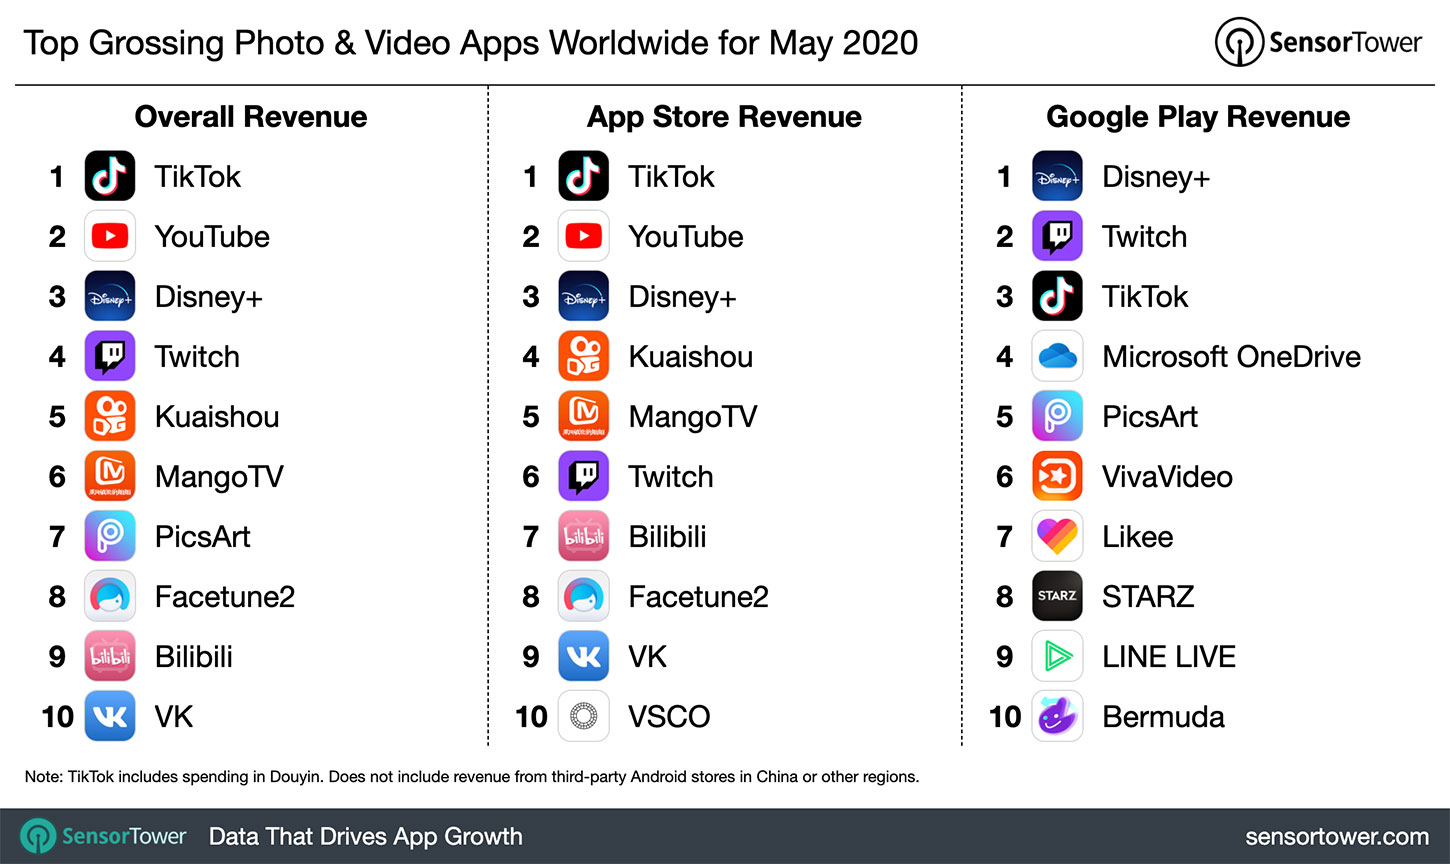 top-grossing-photo-and-video-apps-worldwide-may-2020.jpg